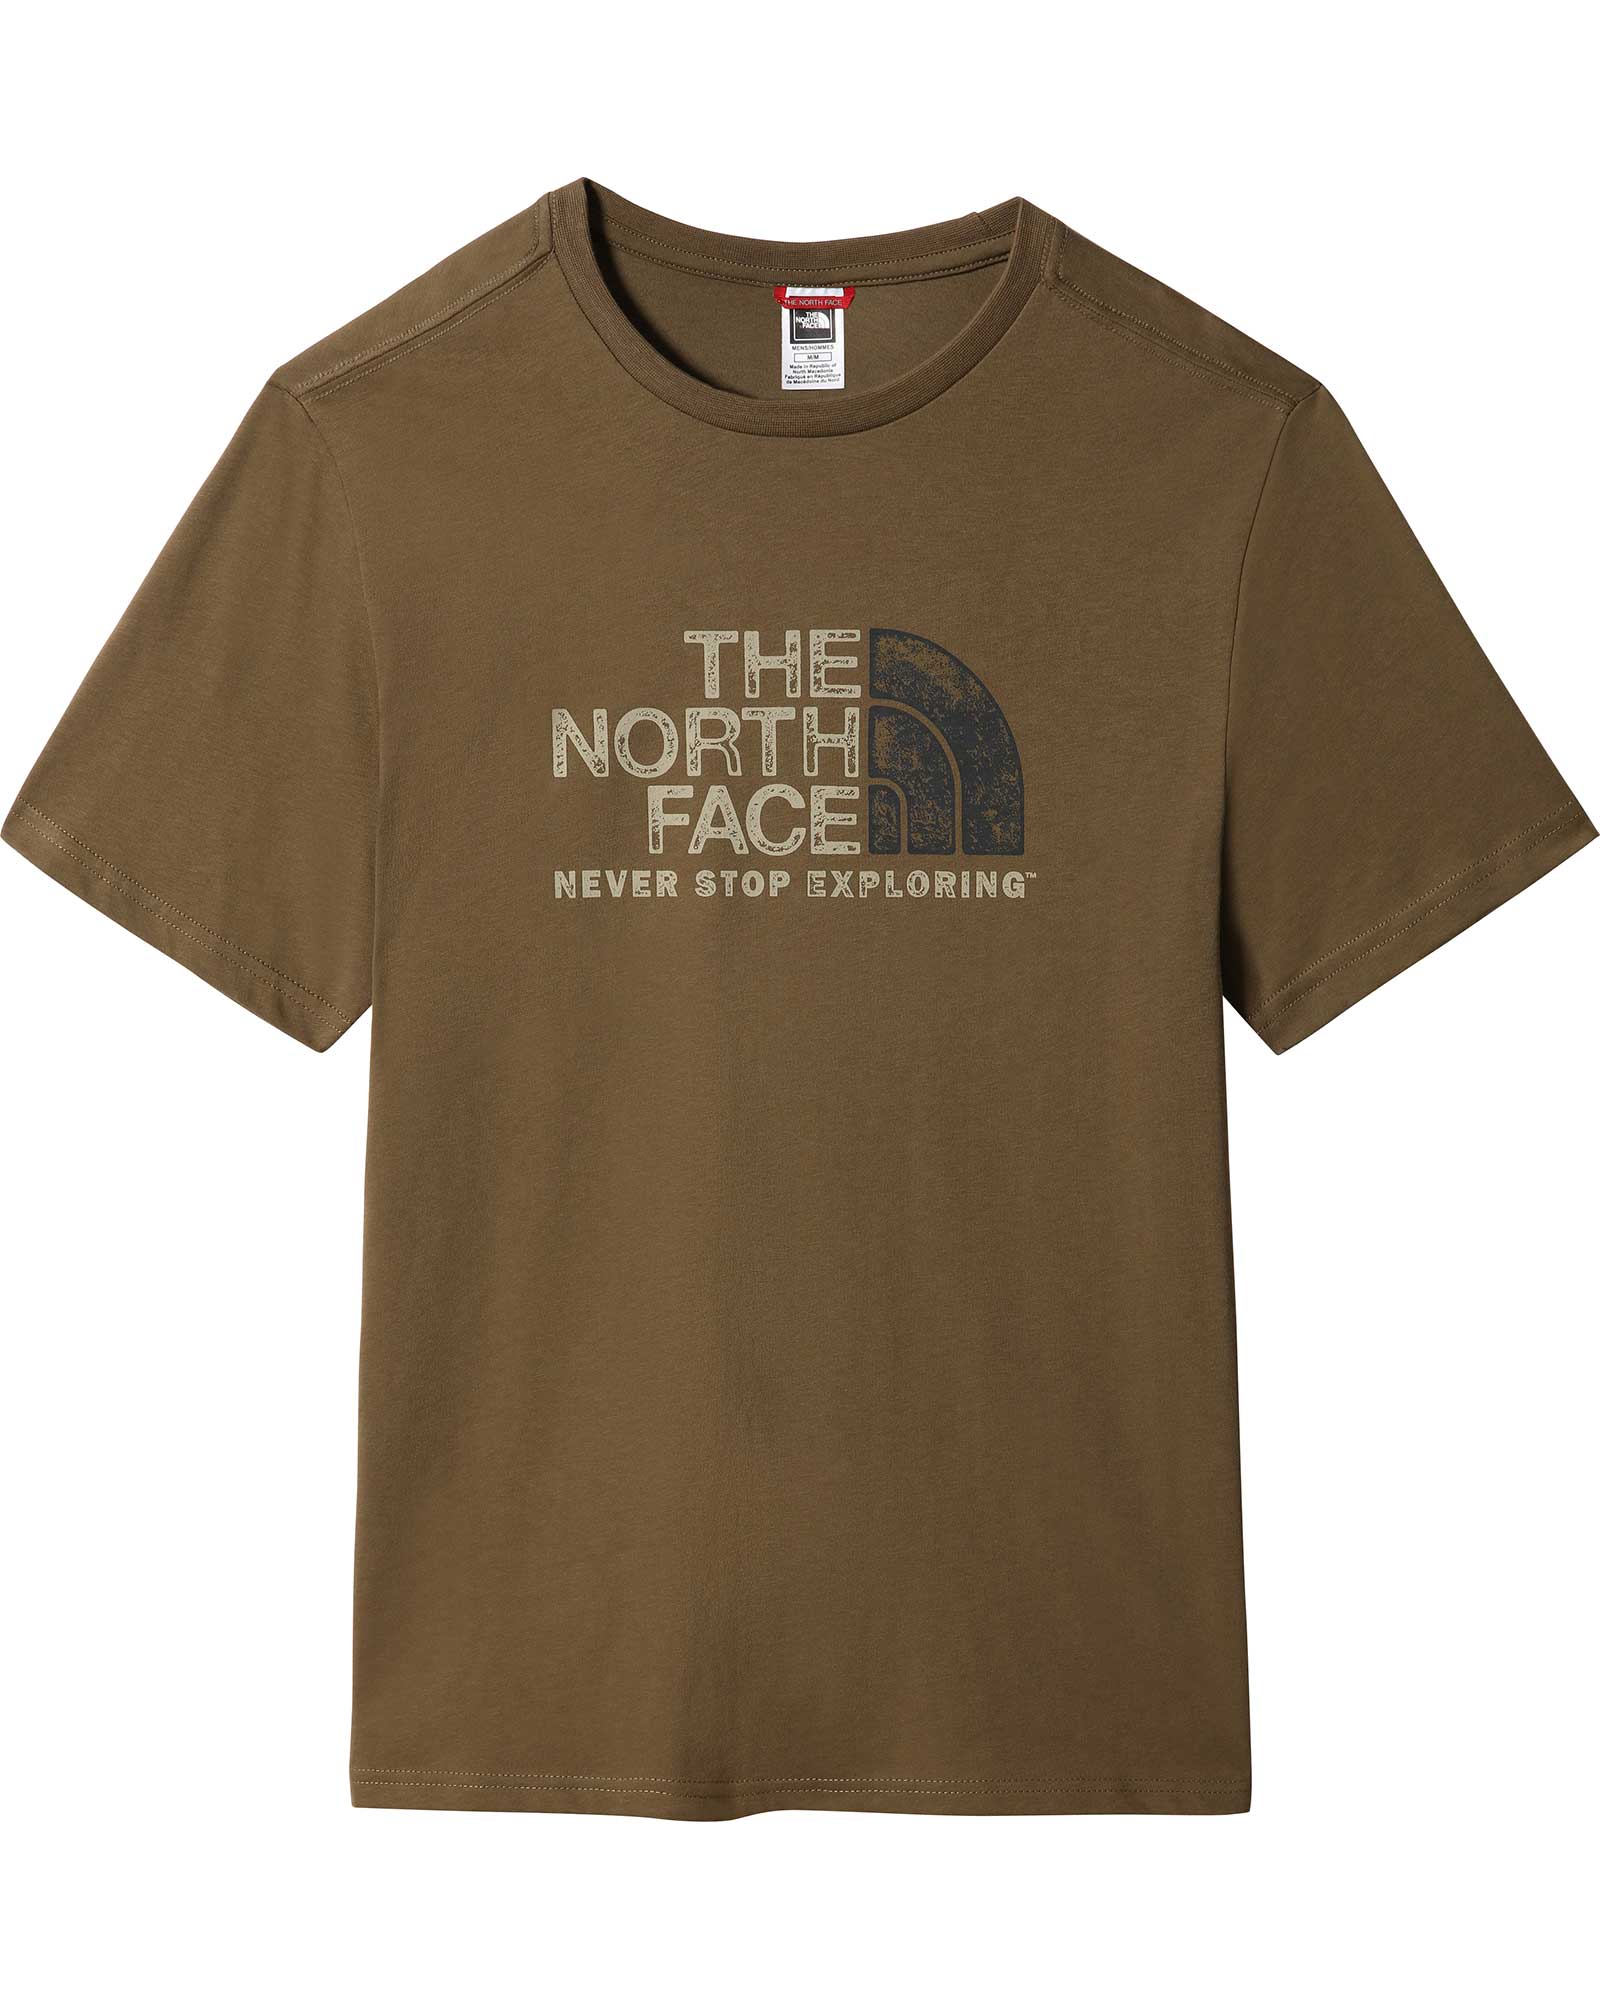 The North Face Rust Men’s T Shirt - Military Olive S